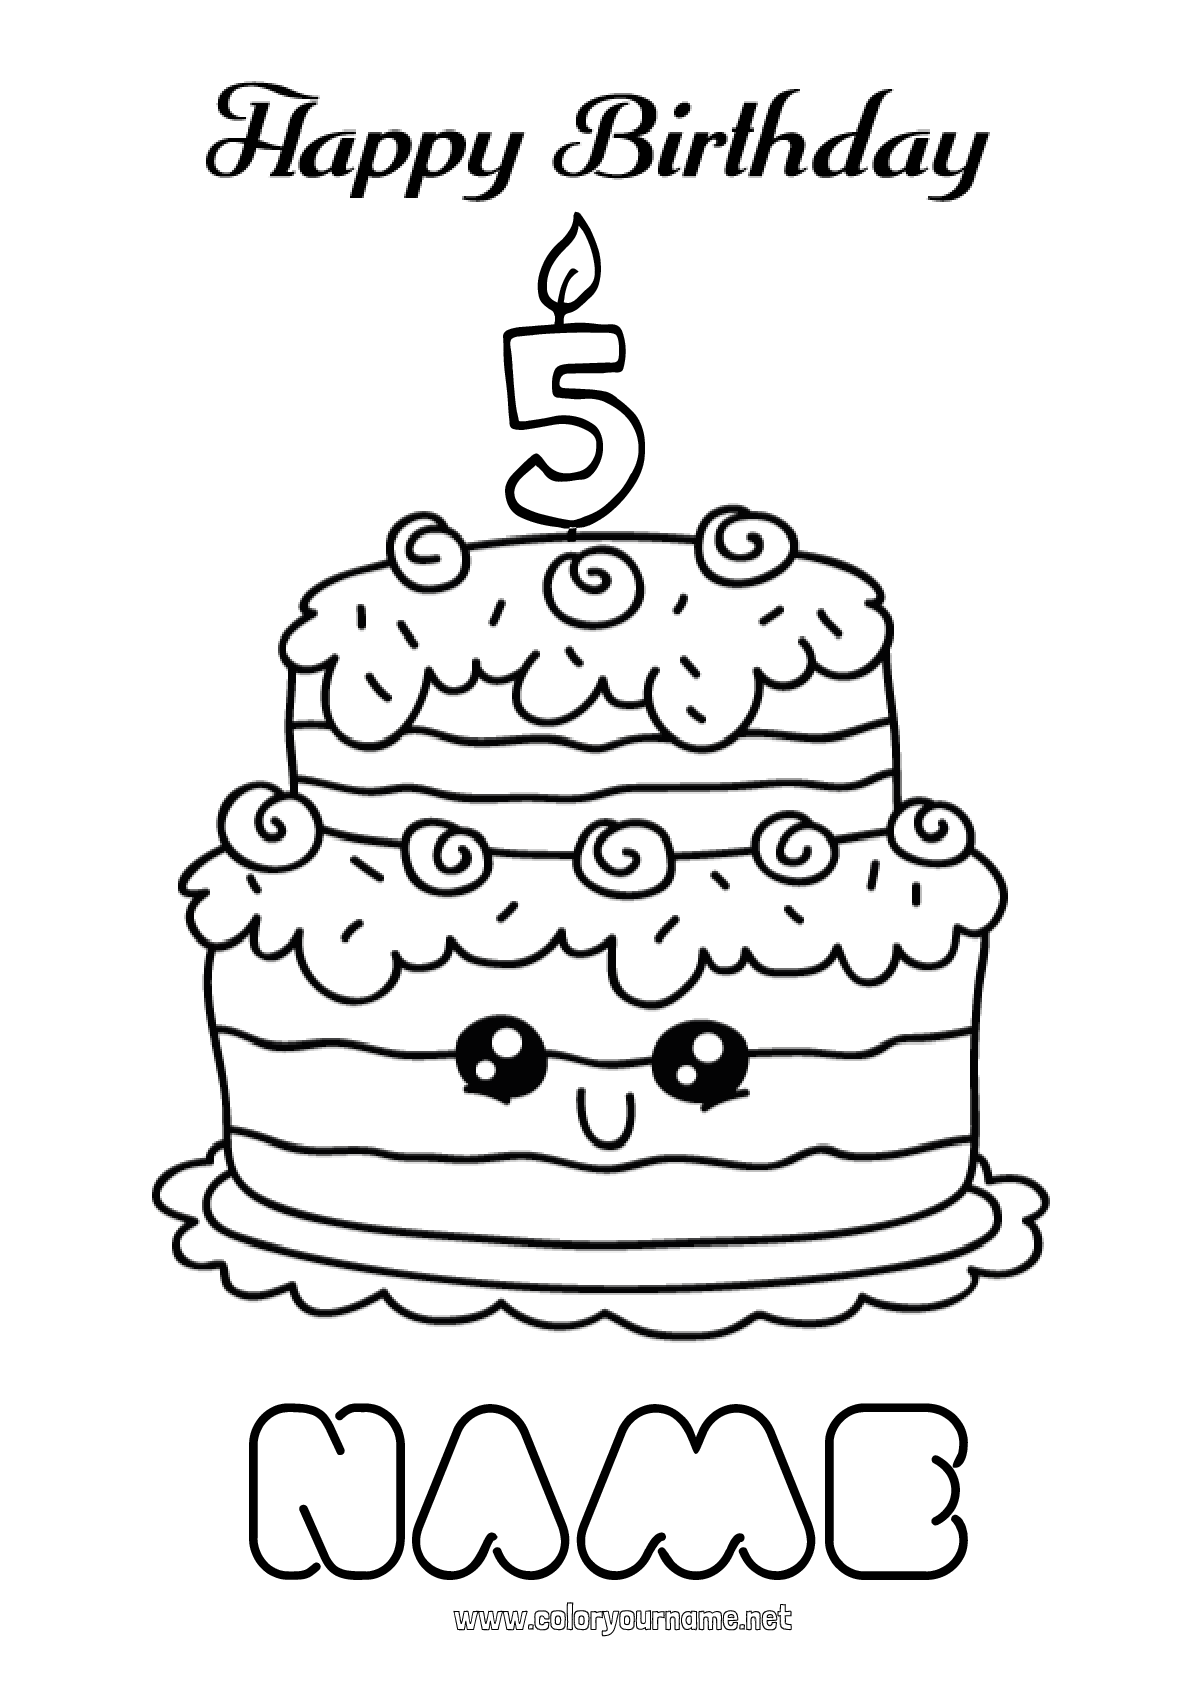 Coloring page No.198 - Candle Cake Birthday